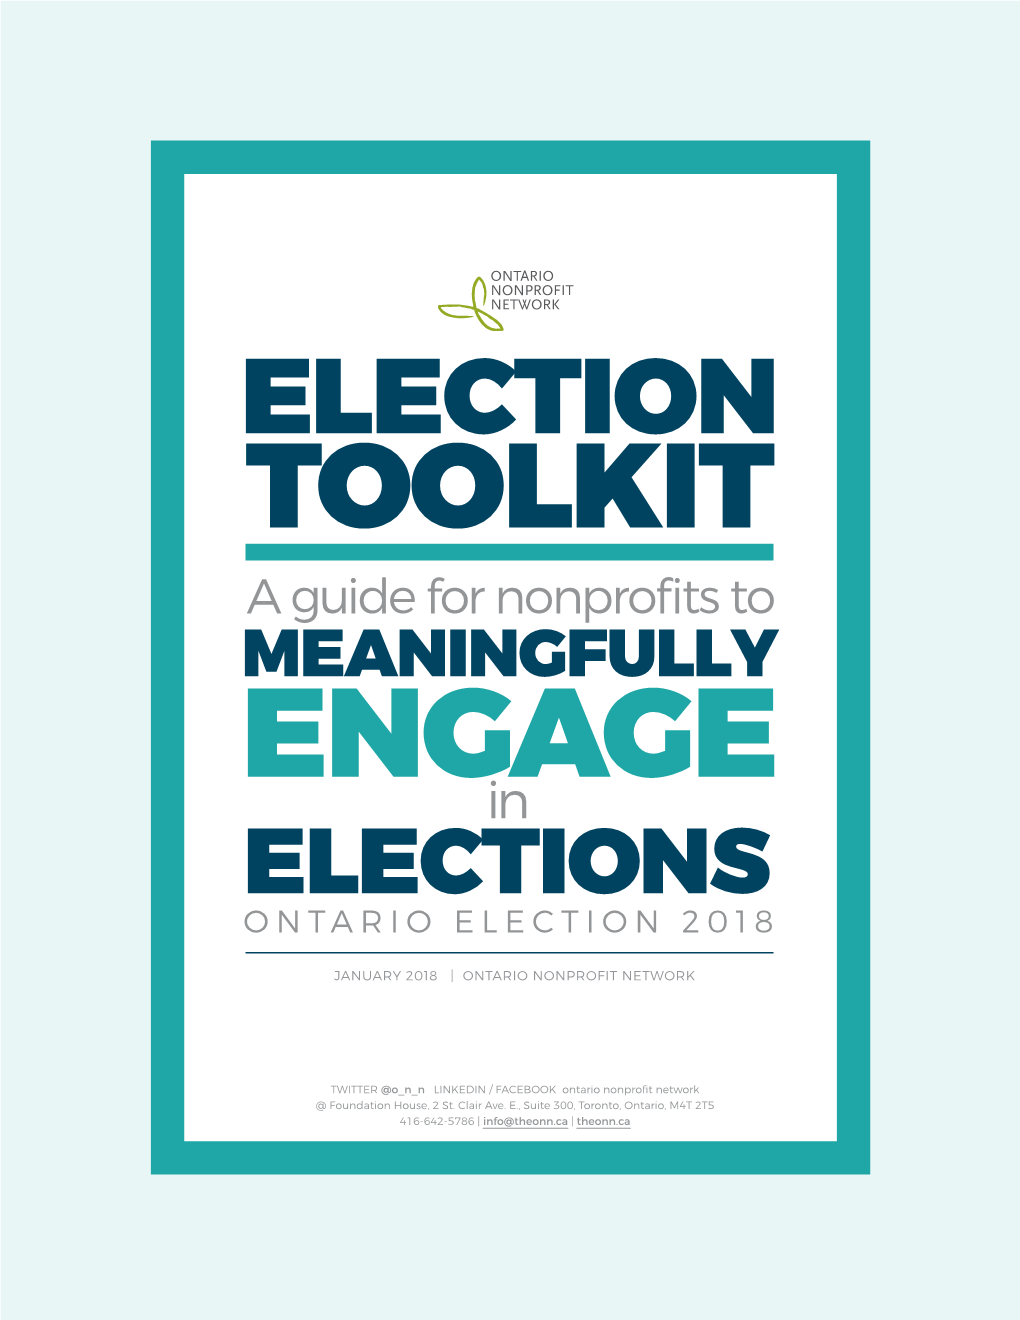 ELECTION TOOLKIT a Guide for Nonprofits to MEANINGFULLY